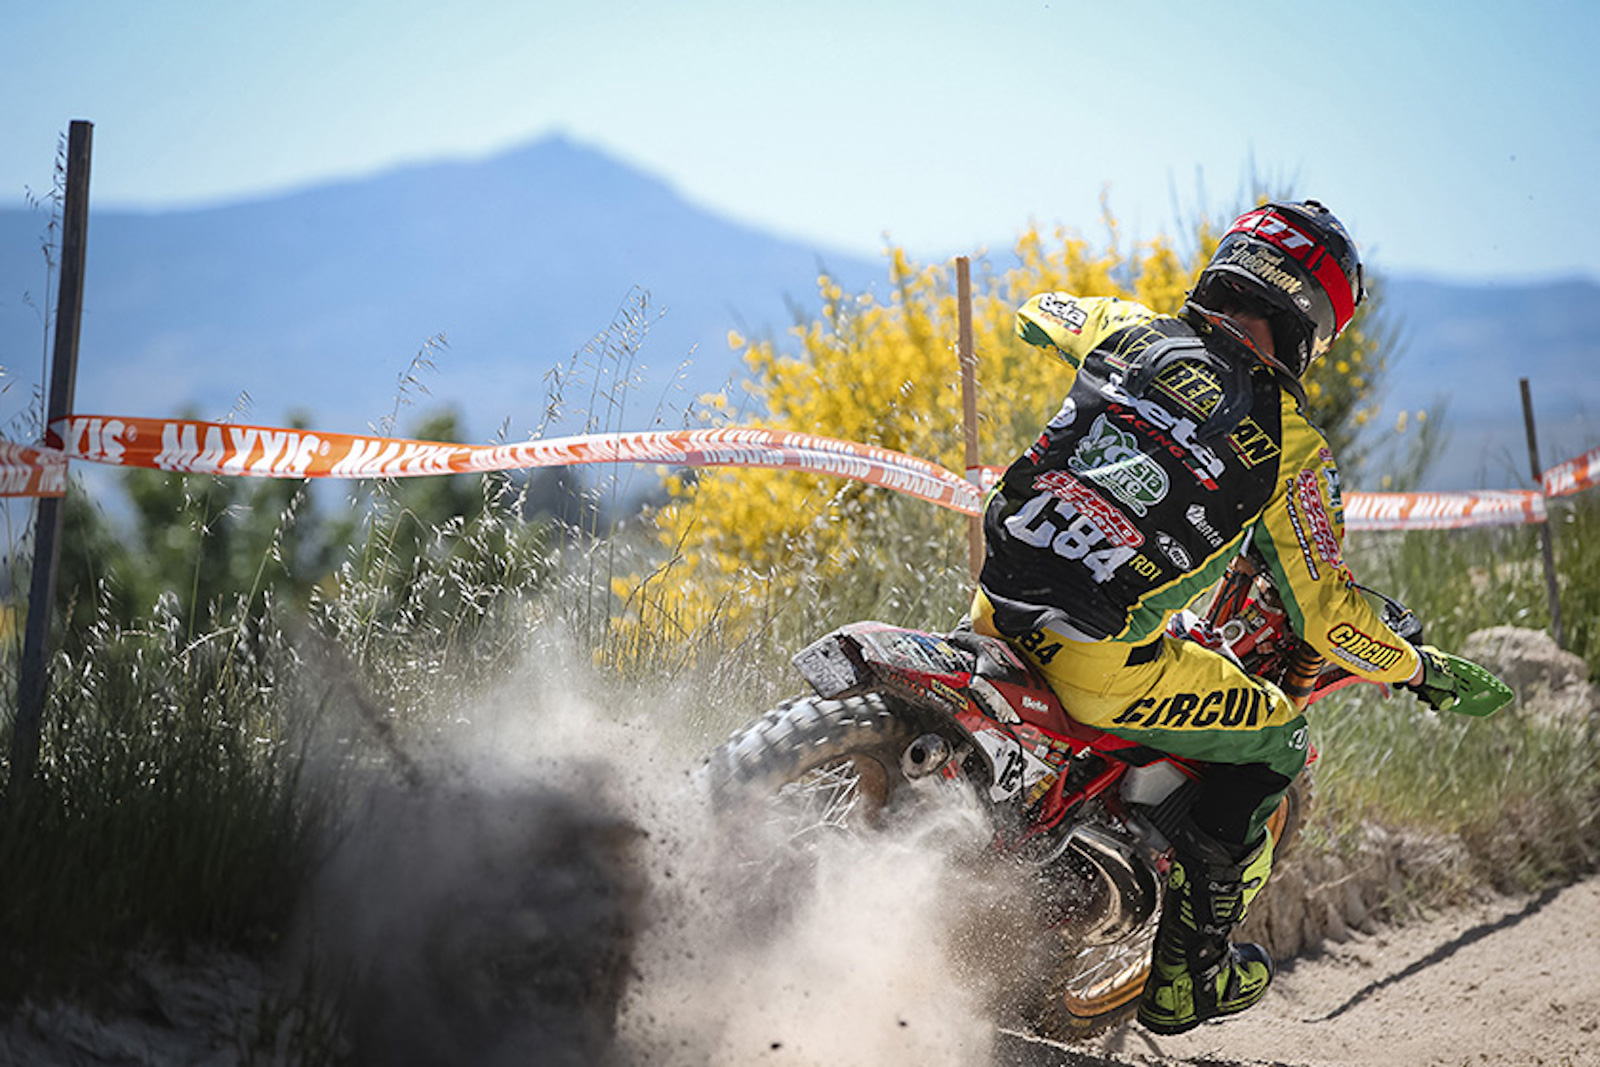 Complete 2020 EnduroGP World Championship dates and venues confirmed